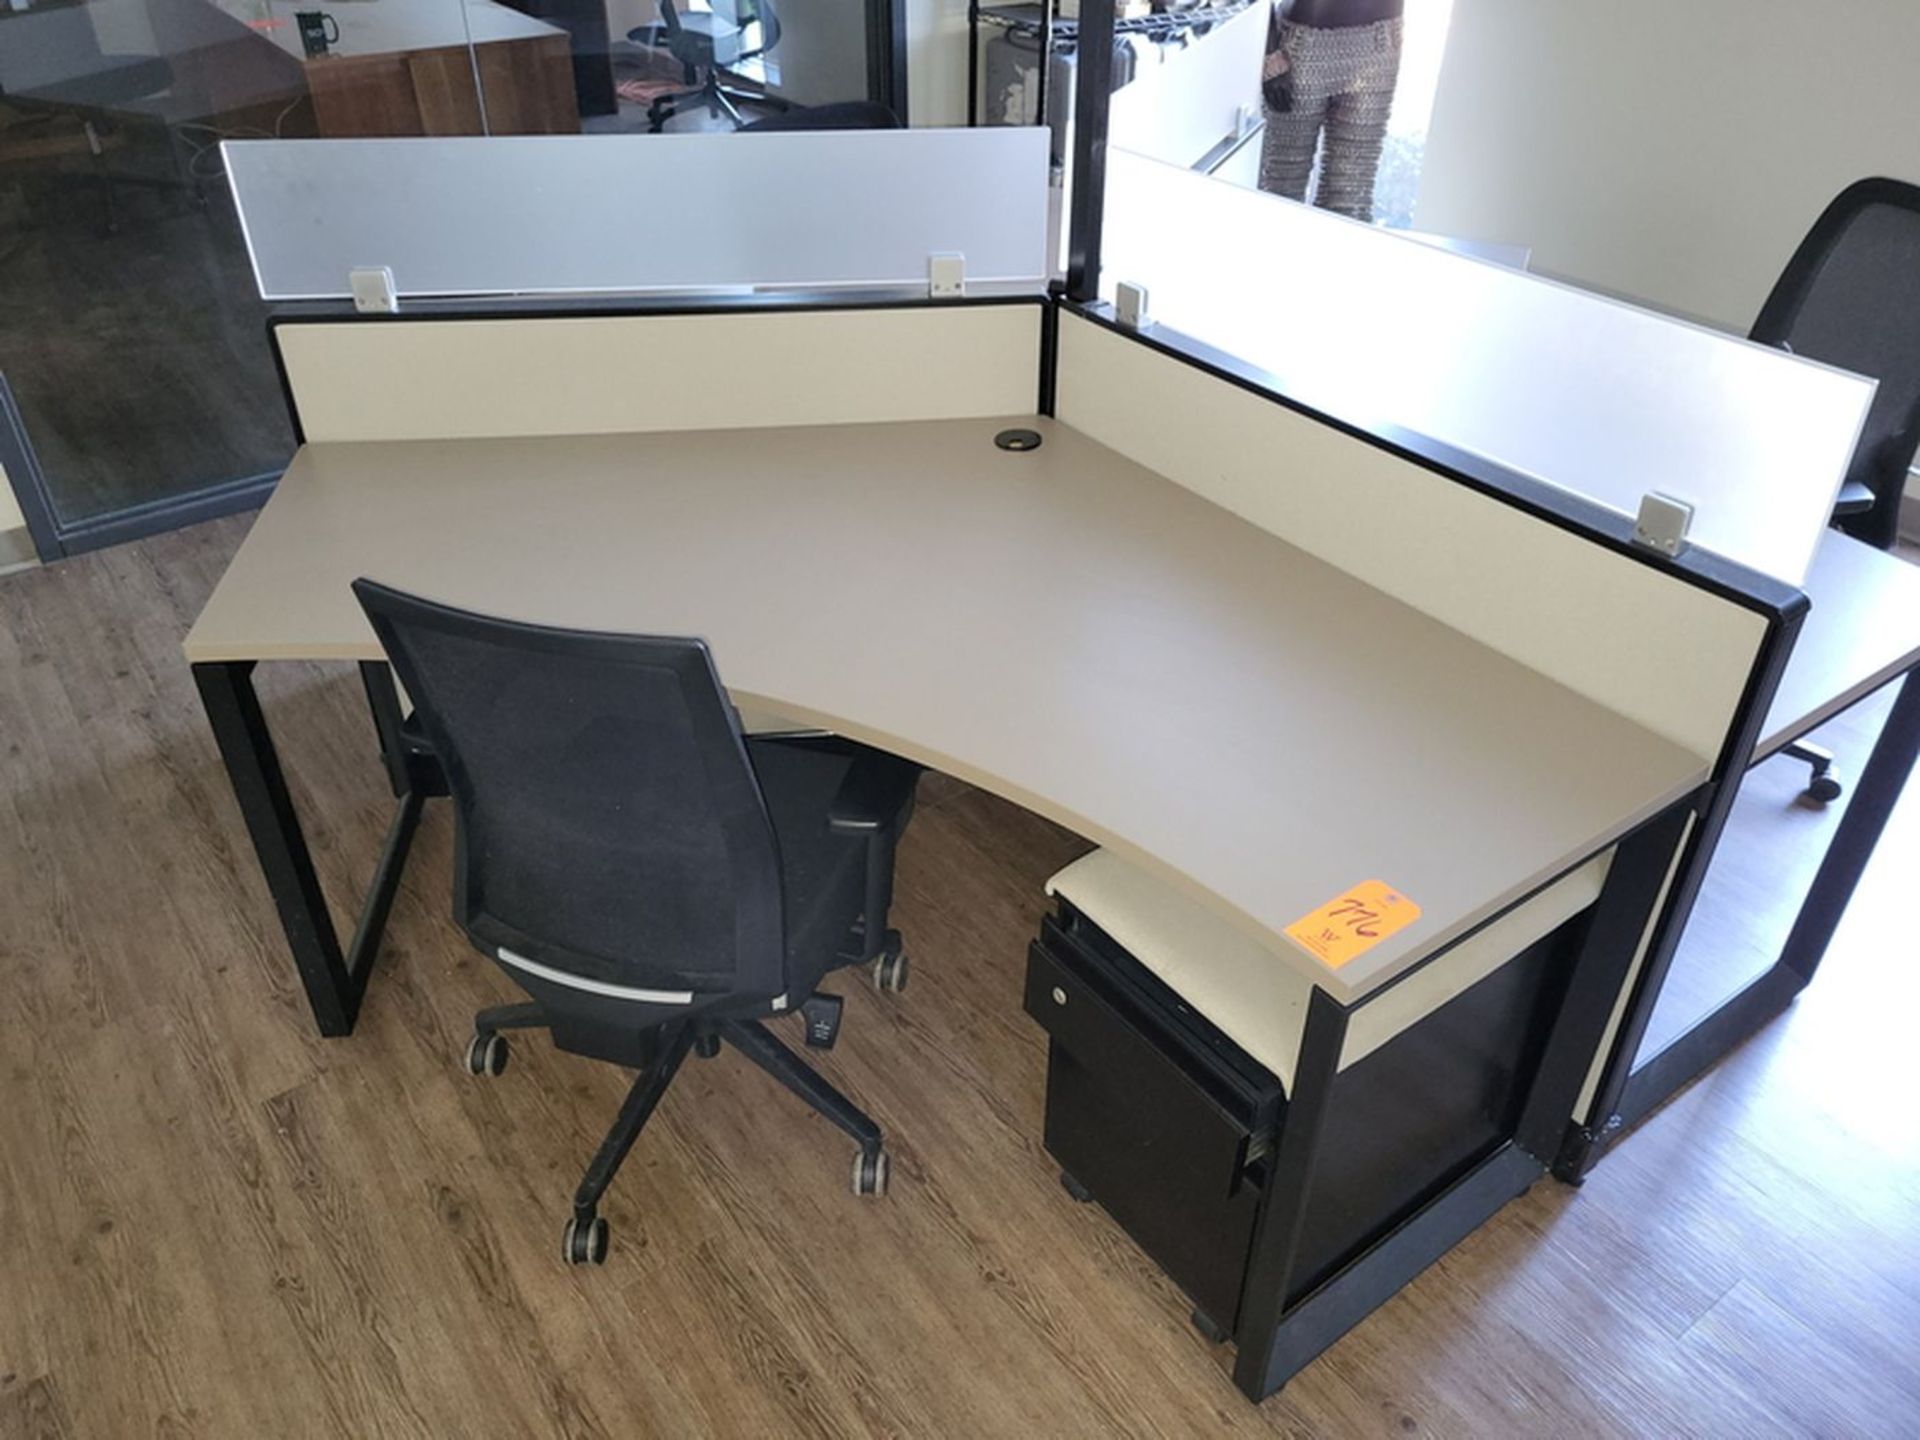 Training Room Desk Unit; and (3) Chairs